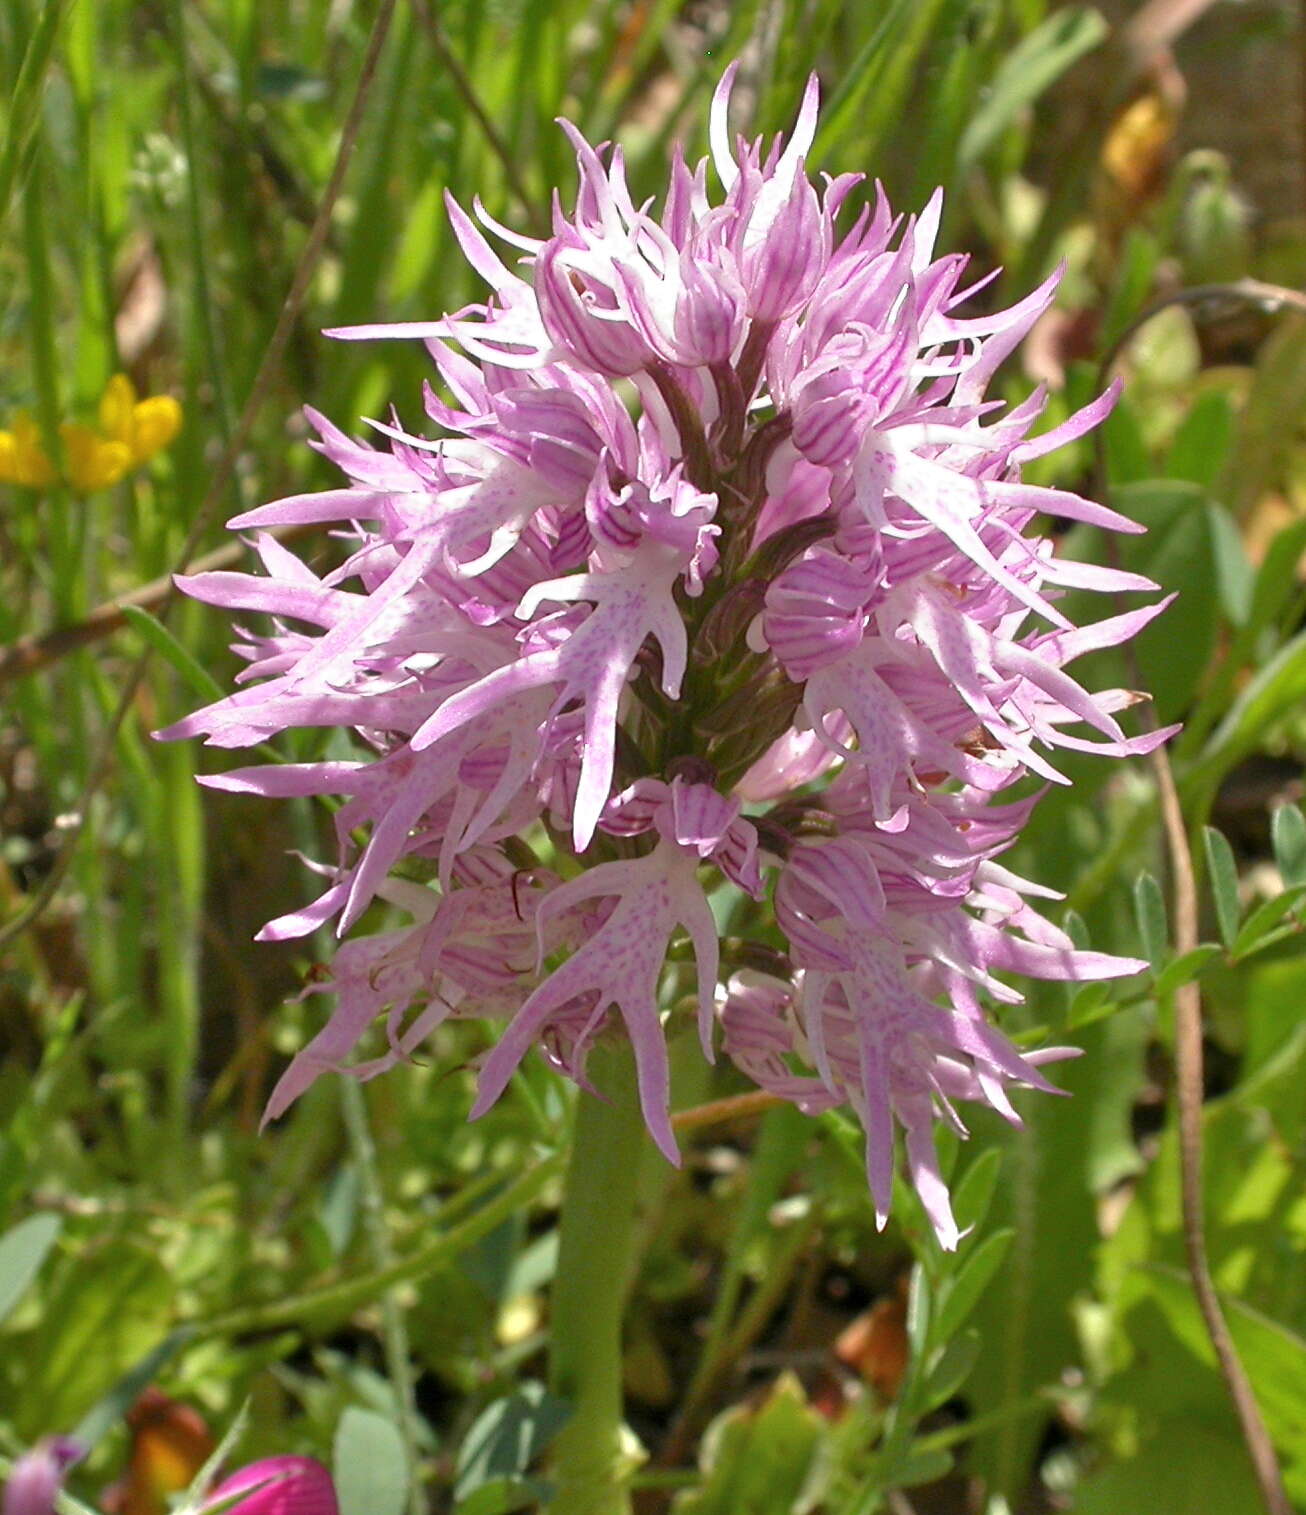 Image of Orchis